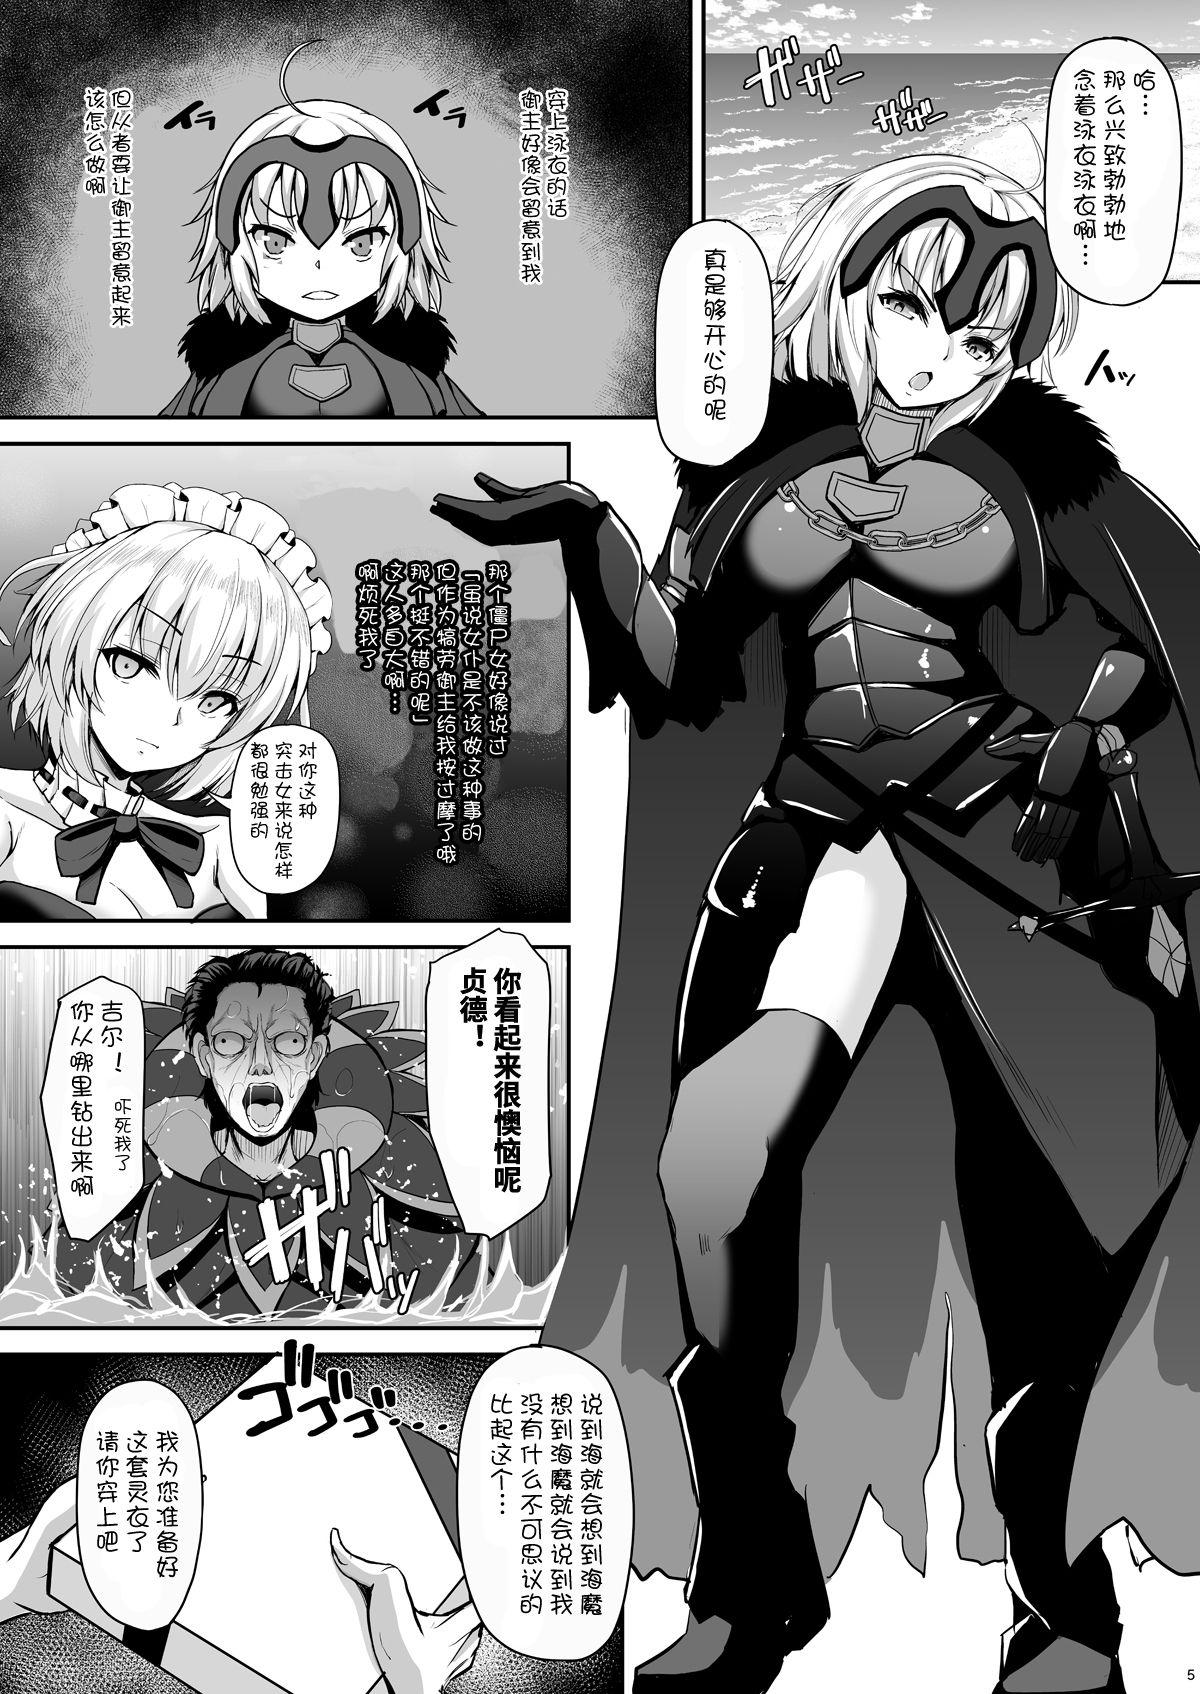 Gay Fuck Jeanne Alter wa Kamatte Hoshii - Fate grand order Porn Star - Page 3